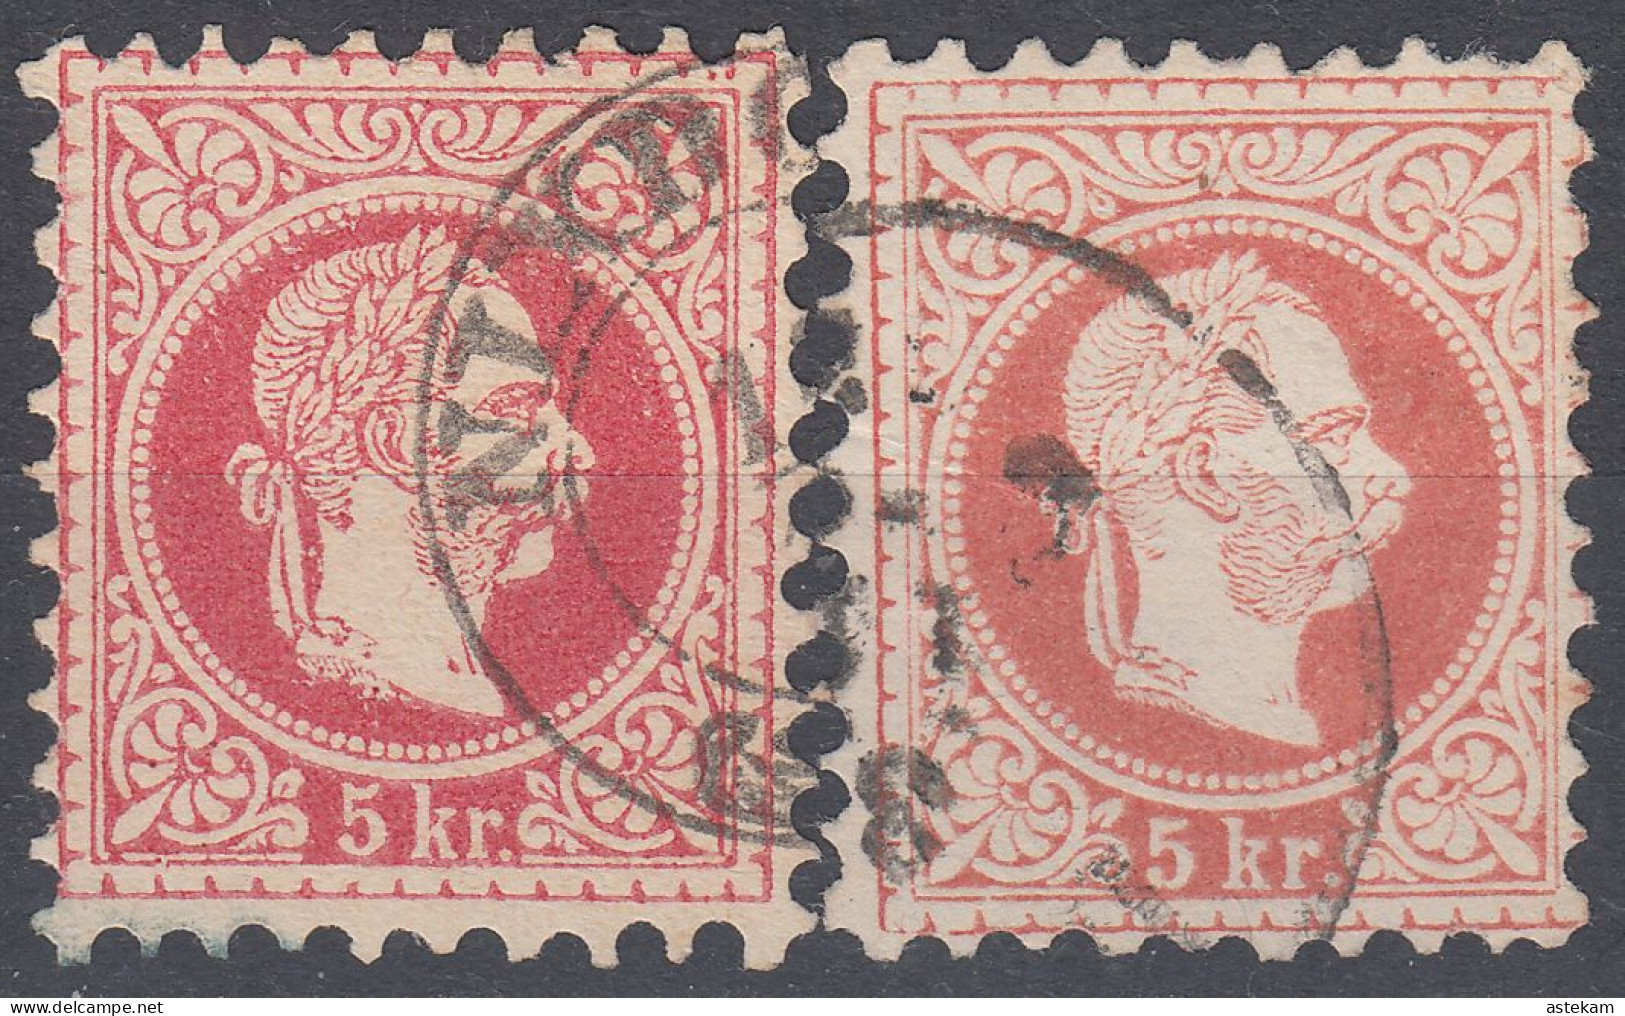 AUSTRIA 1867, KAISER FRANZ JOSEPH, MiNo 37, TWO USED STAMPS From 5.oo KROUZERS In ERROR With DIFFERENT COLORS - Oblitérés